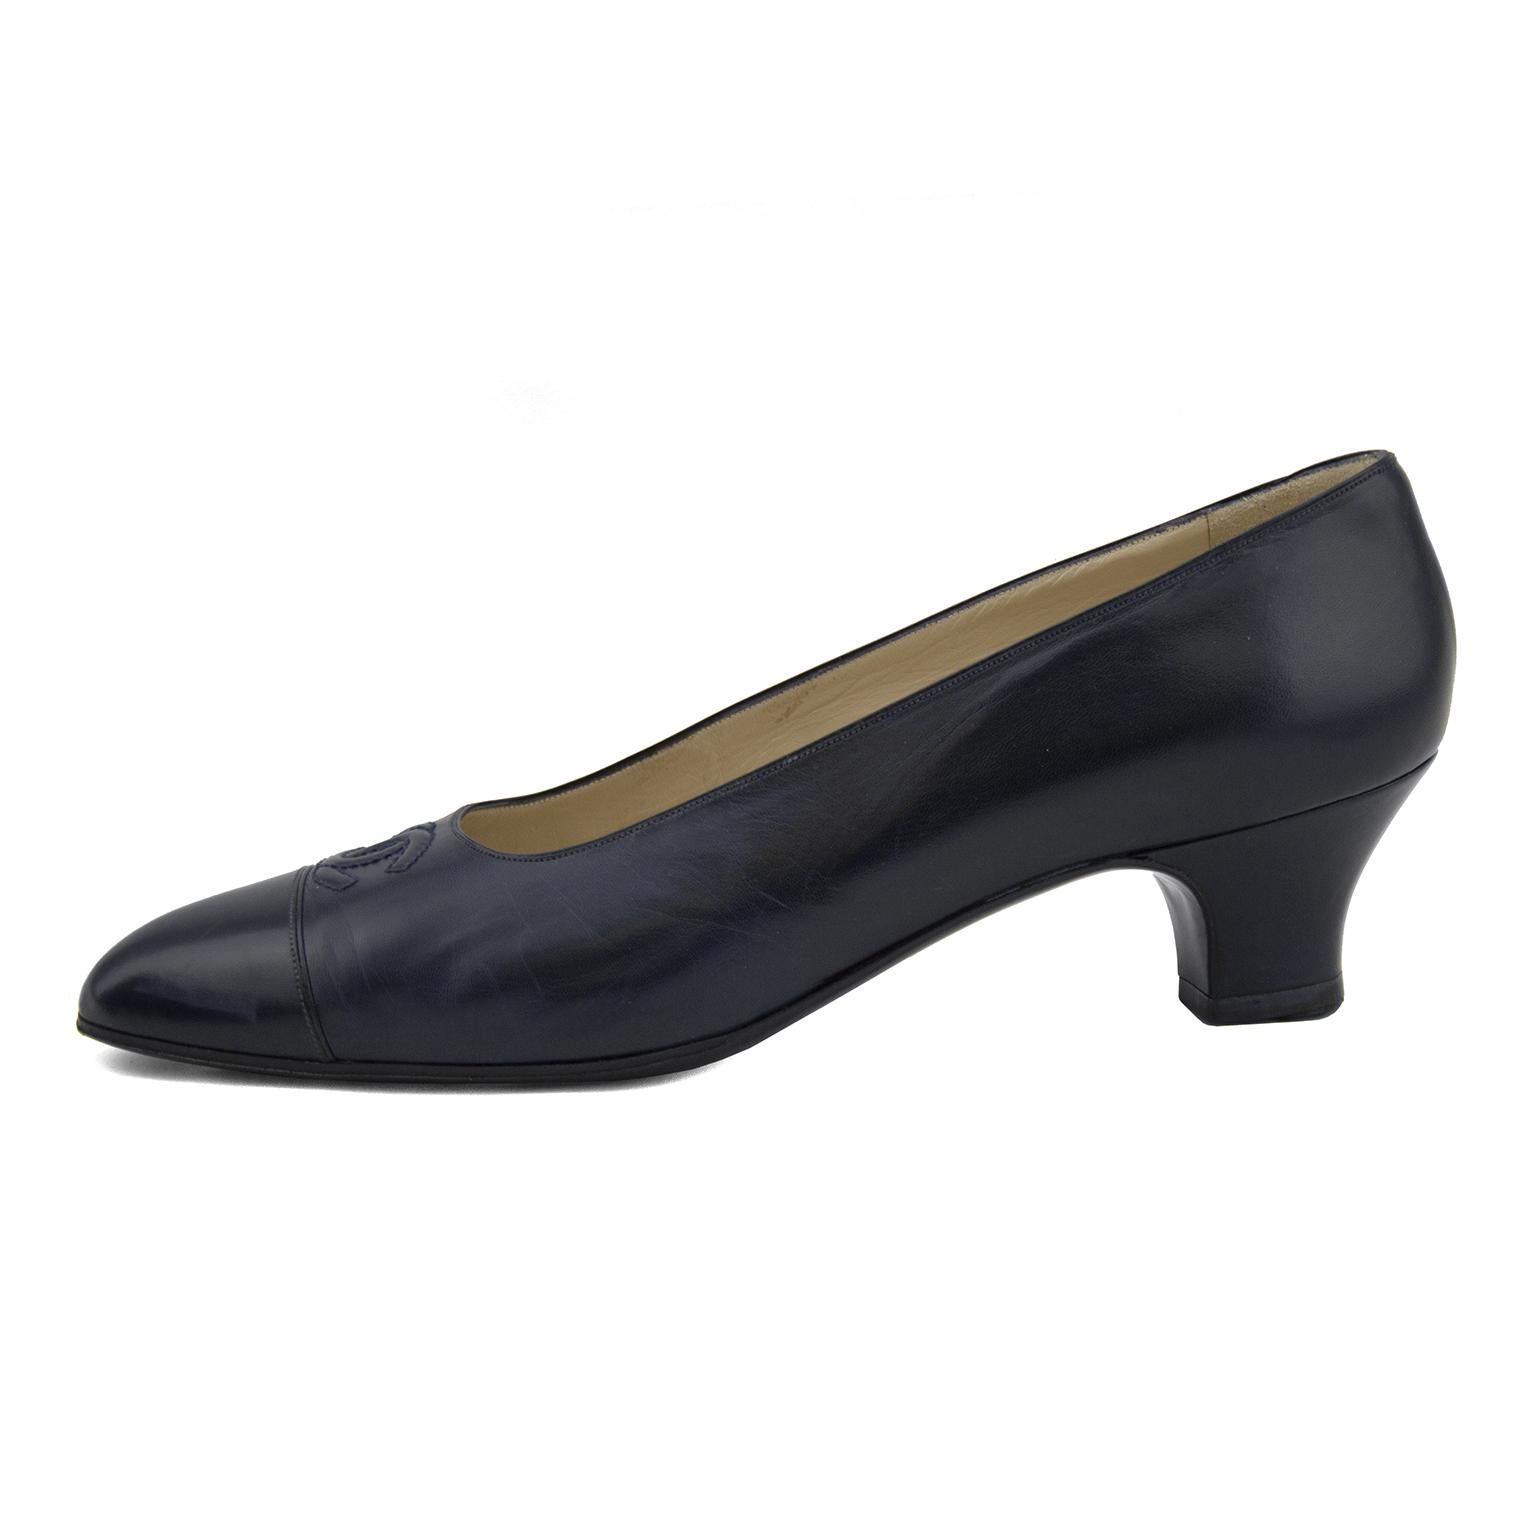 Late 1980s leather Chanel kitten heel. Navy with tonal cap toe. Tonal cc logo at toe. Cream leather interior with gold brand stamp. Excellent vintage condition - very slight creasing at toes. Size FR 40. Fits closer to 39.5.
